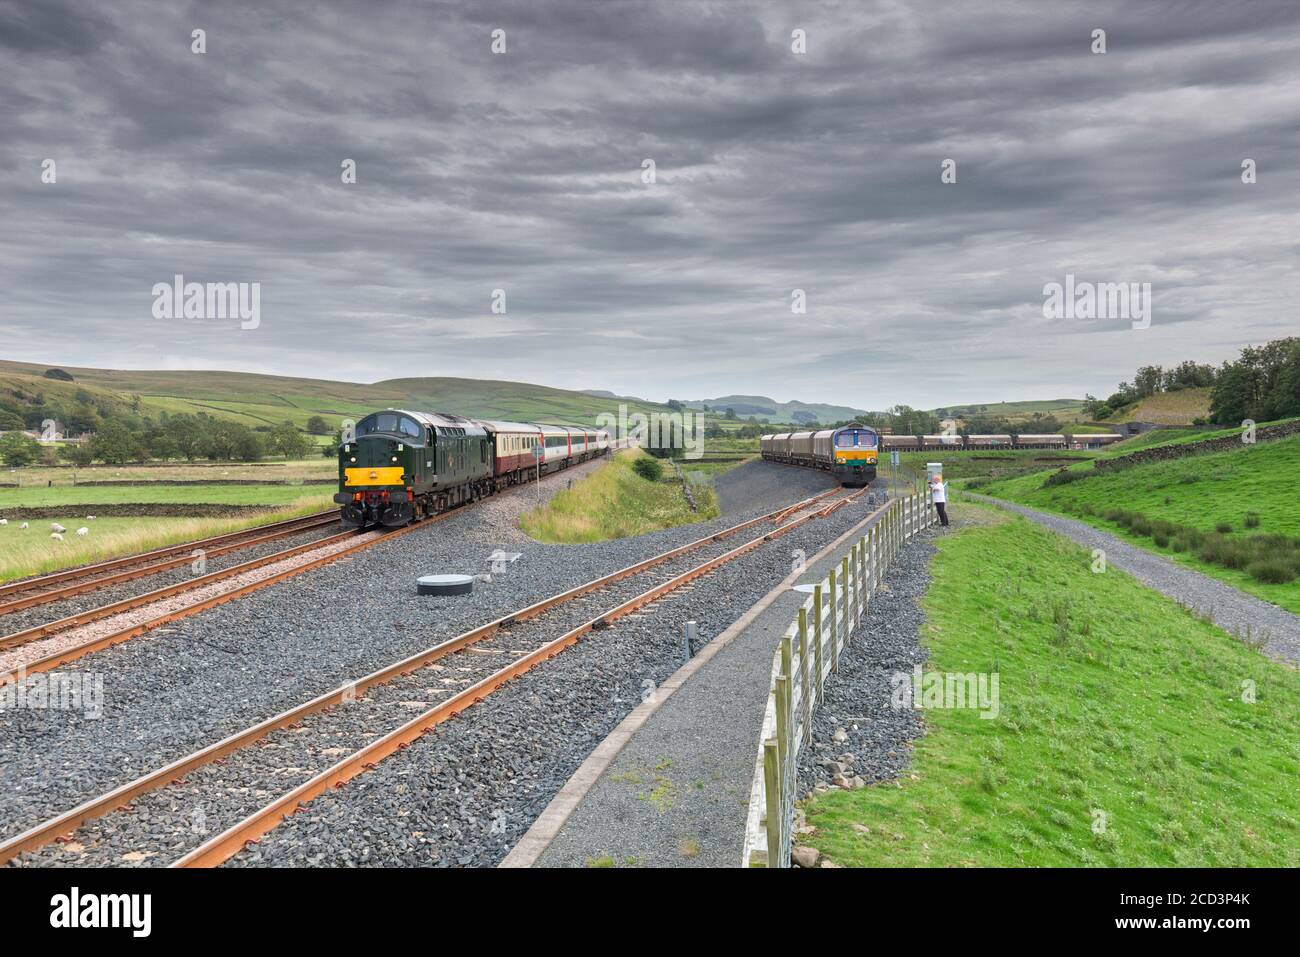 Class 37 locomotive 37521 passing  GB Railfreight class 66 66711 in the Arcow Quarry siding while hauling the 'staycation express' tourist train Stock Photo